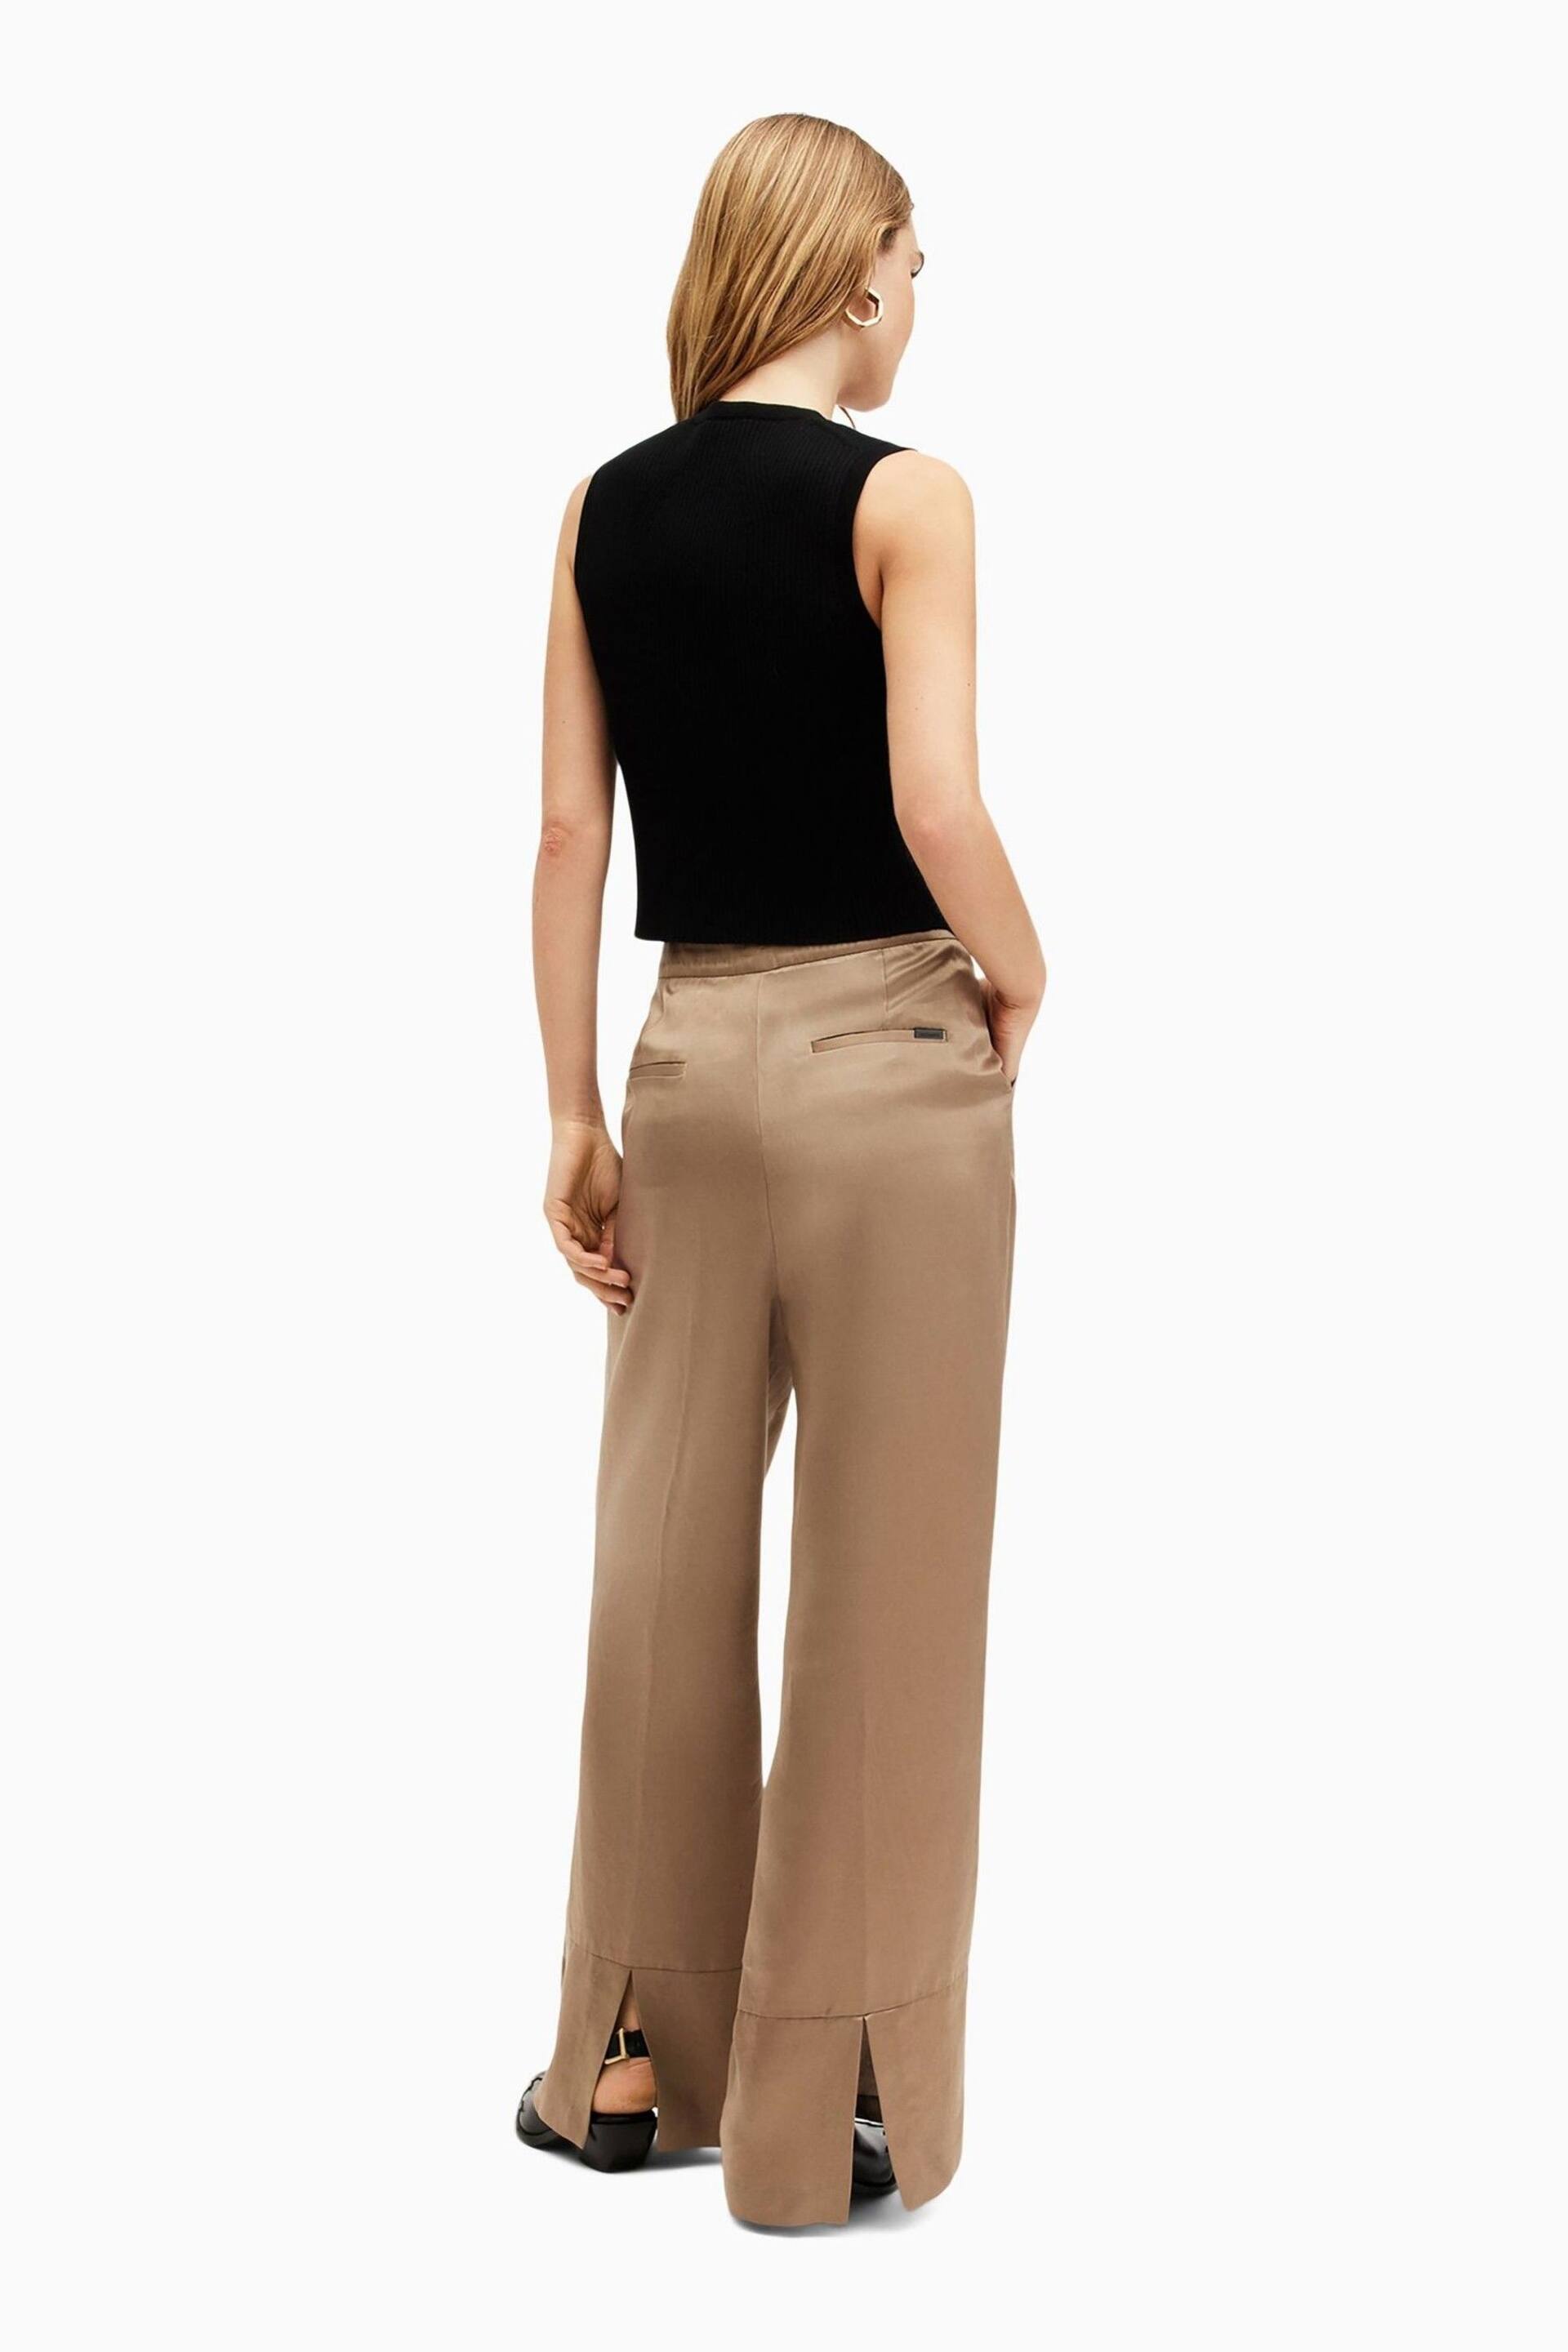 AllSaints Brown Goldie Trousers - Image 7 of 8